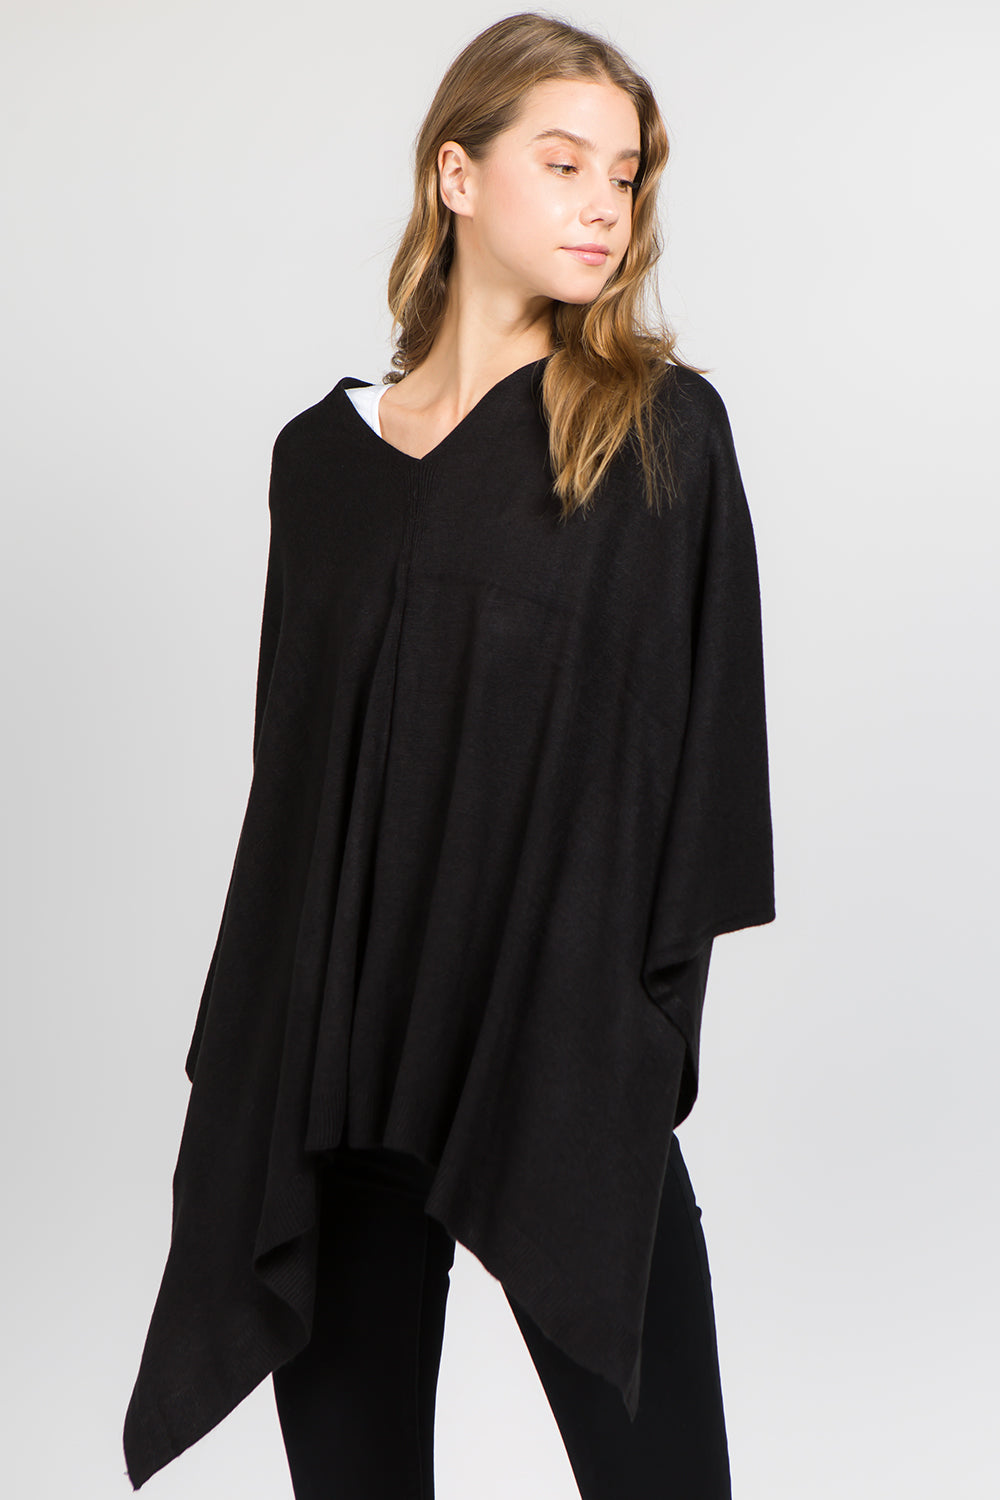 Classic Poncho Topper 11 Colors